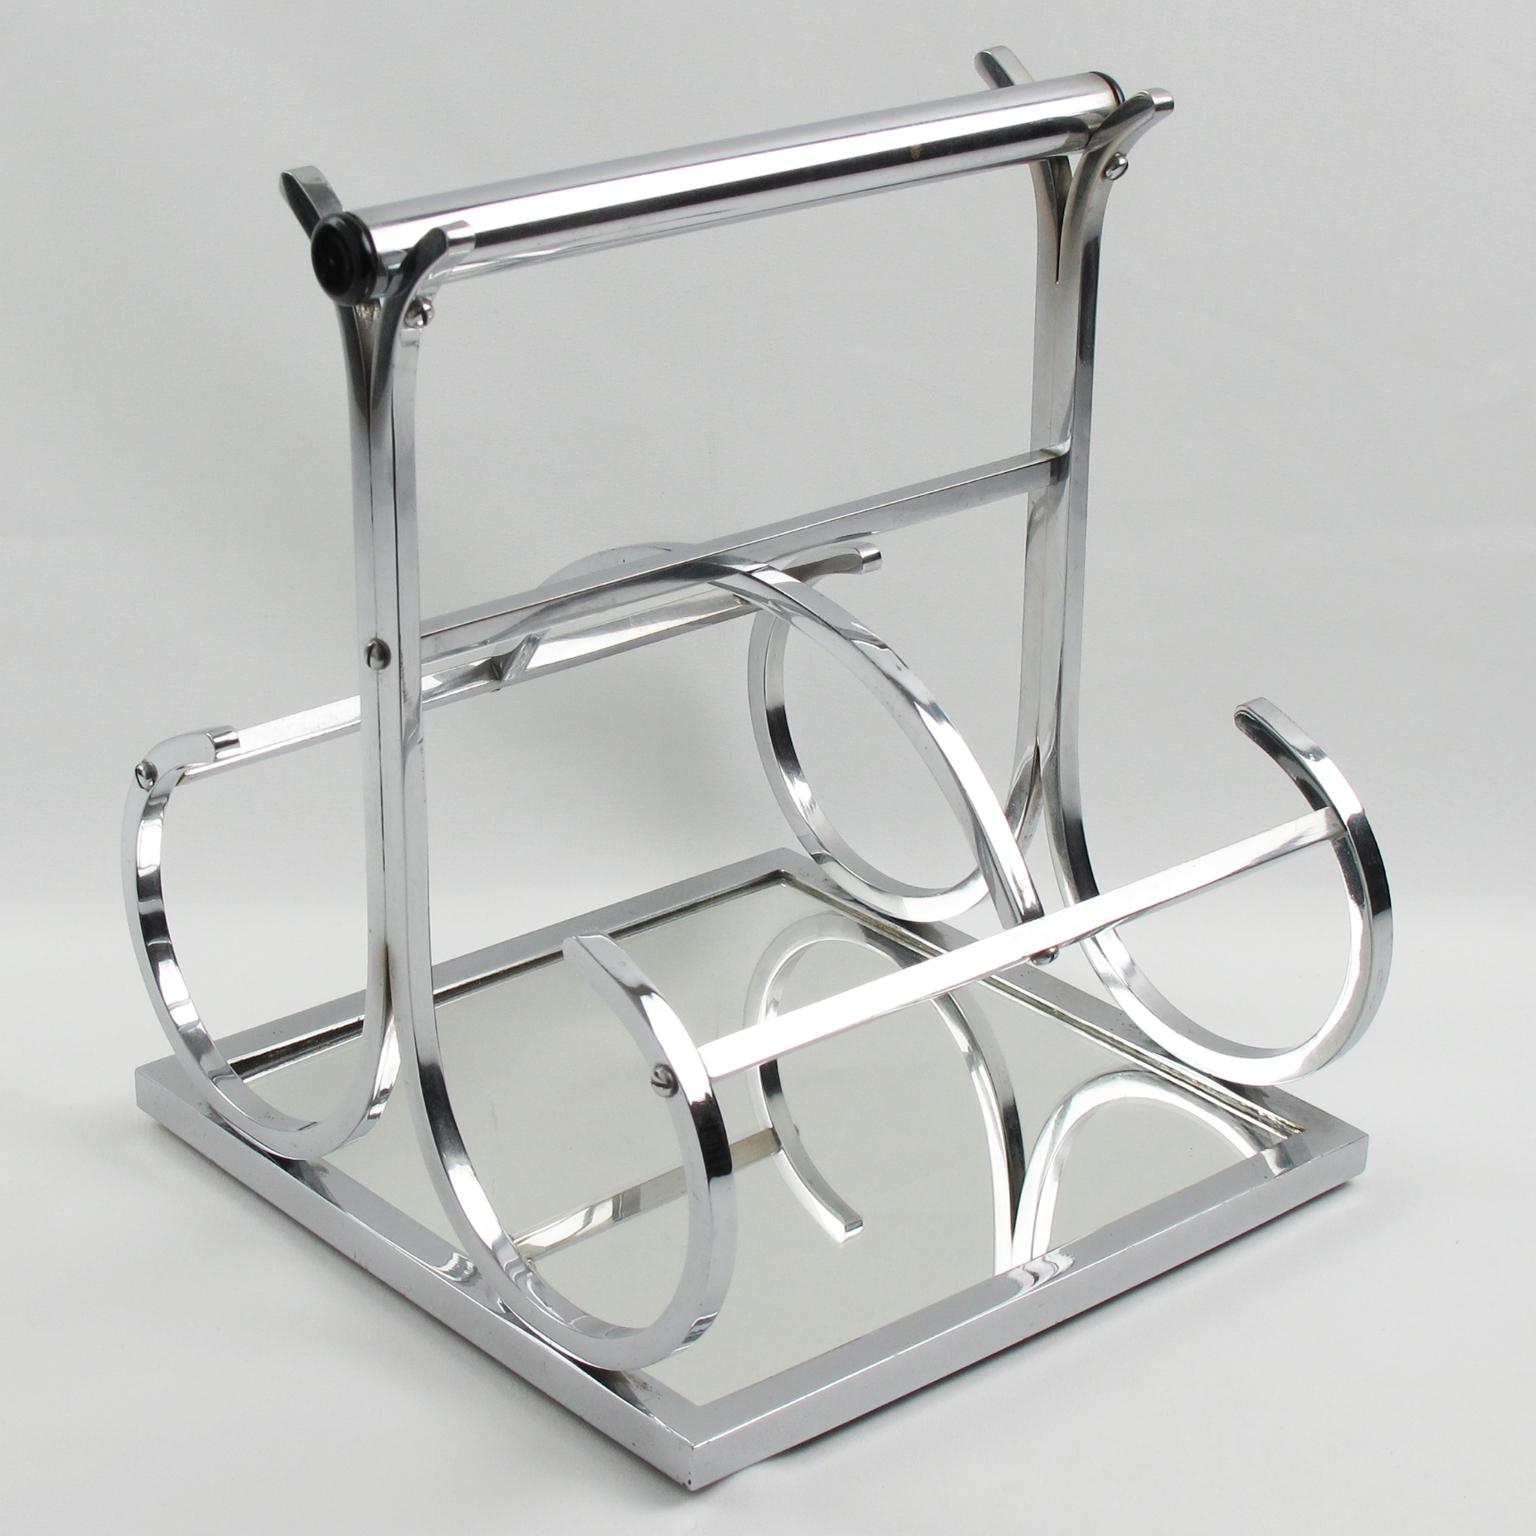 French designer Jacques Adnet (1901 - 1984) designed this elegant Art Deco modernist wine bottle carrier or holder in the 1930s. The barware piece boasts a streamlined sculptural geometric shape with chrome-plated metal, mirror, and black Bakelite.